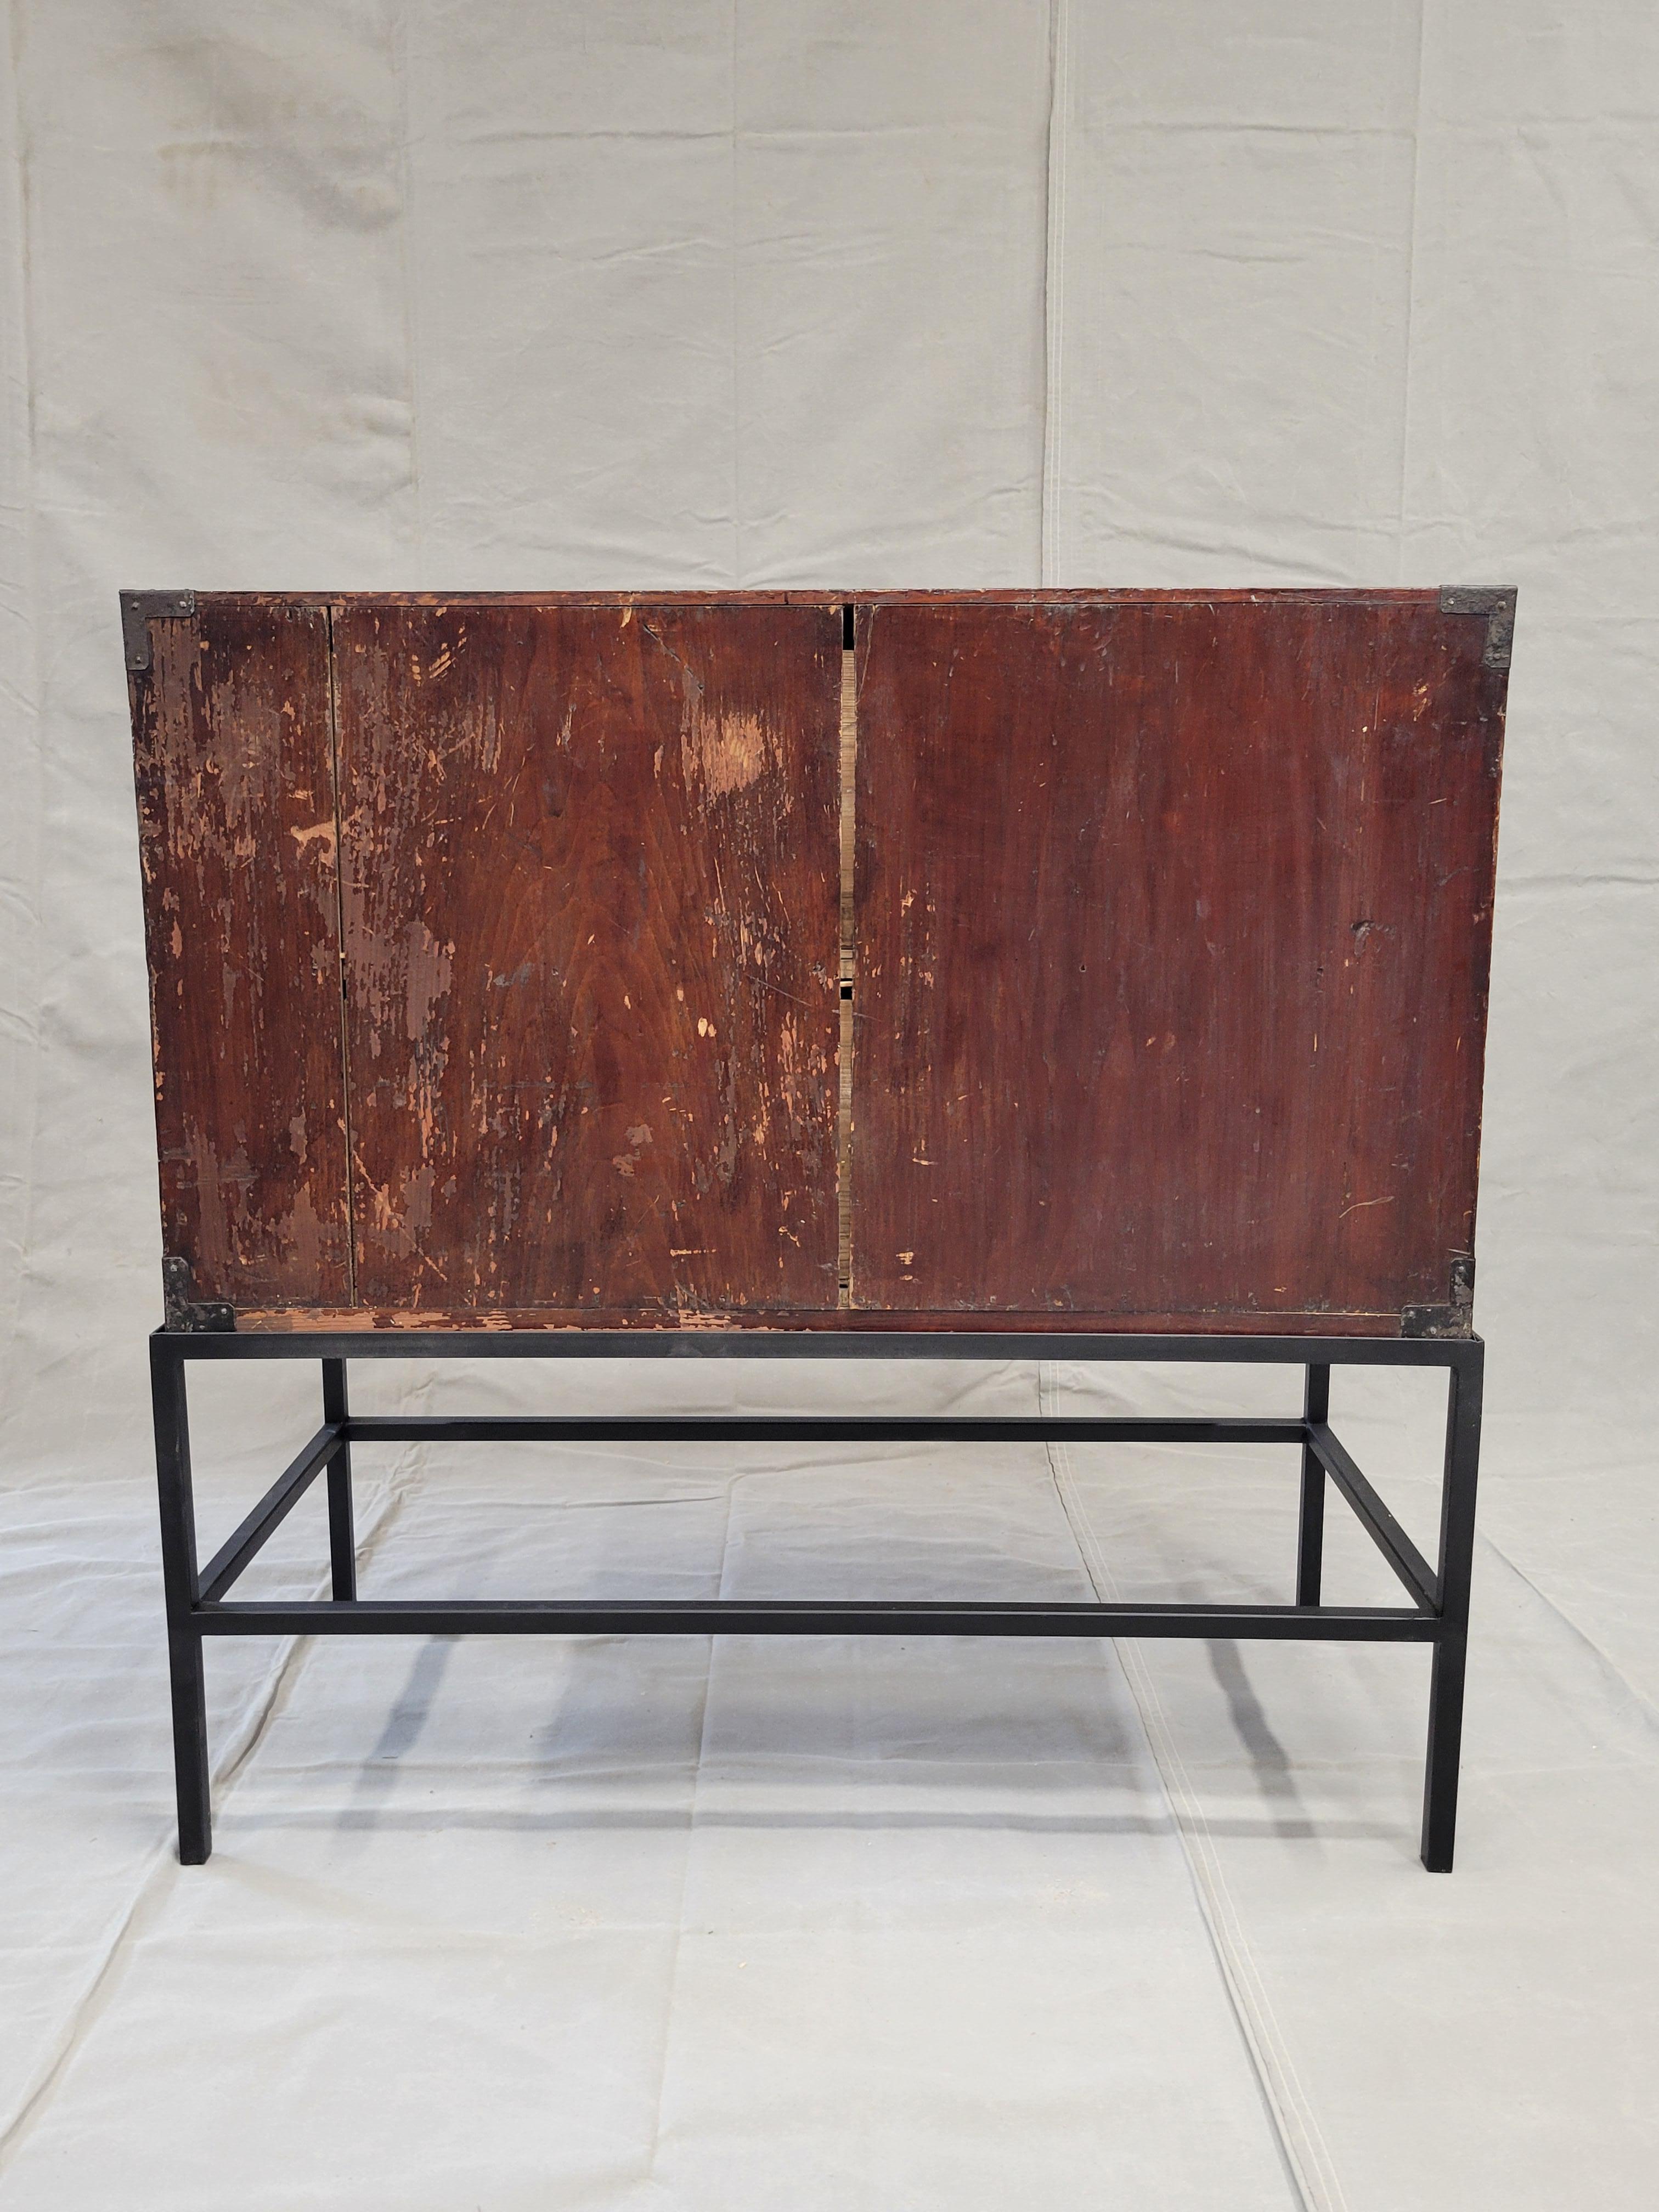 Antique Japanese Tansu Chest With Drawers on Contemporary Metal Stand Console For Sale 5